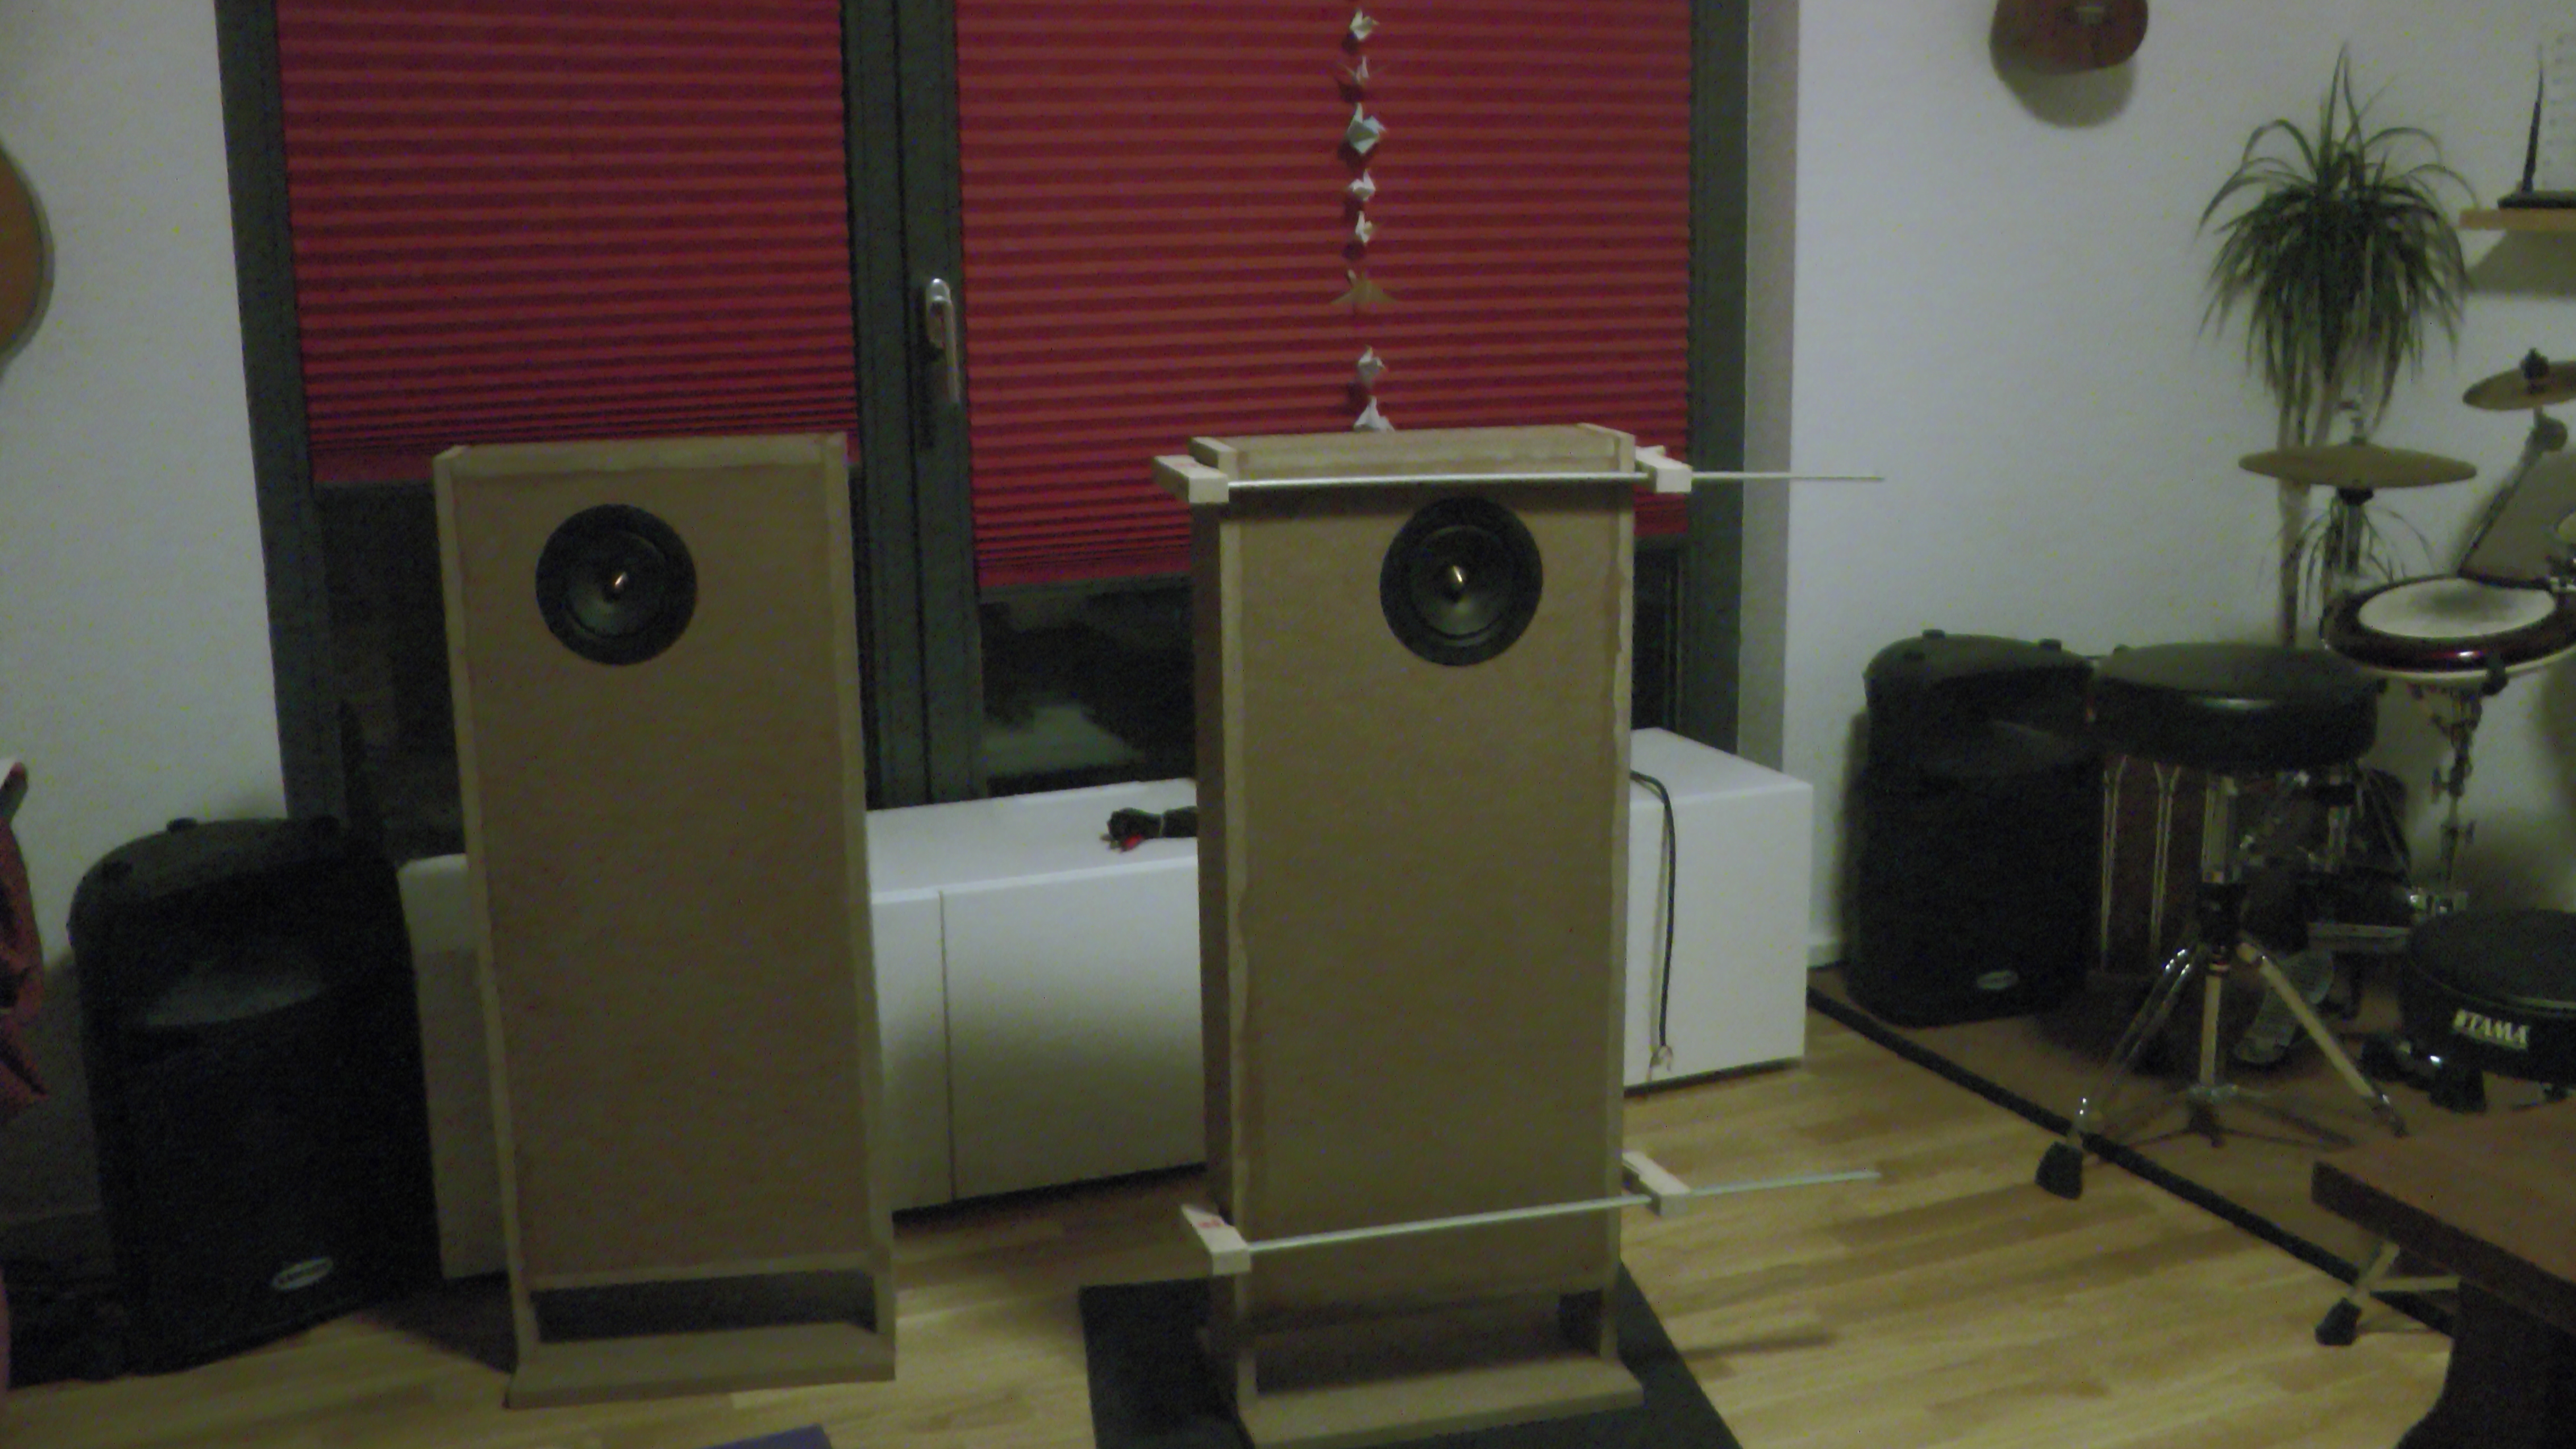 Waiting for the glue to dry after sealing the second speaker cabinet